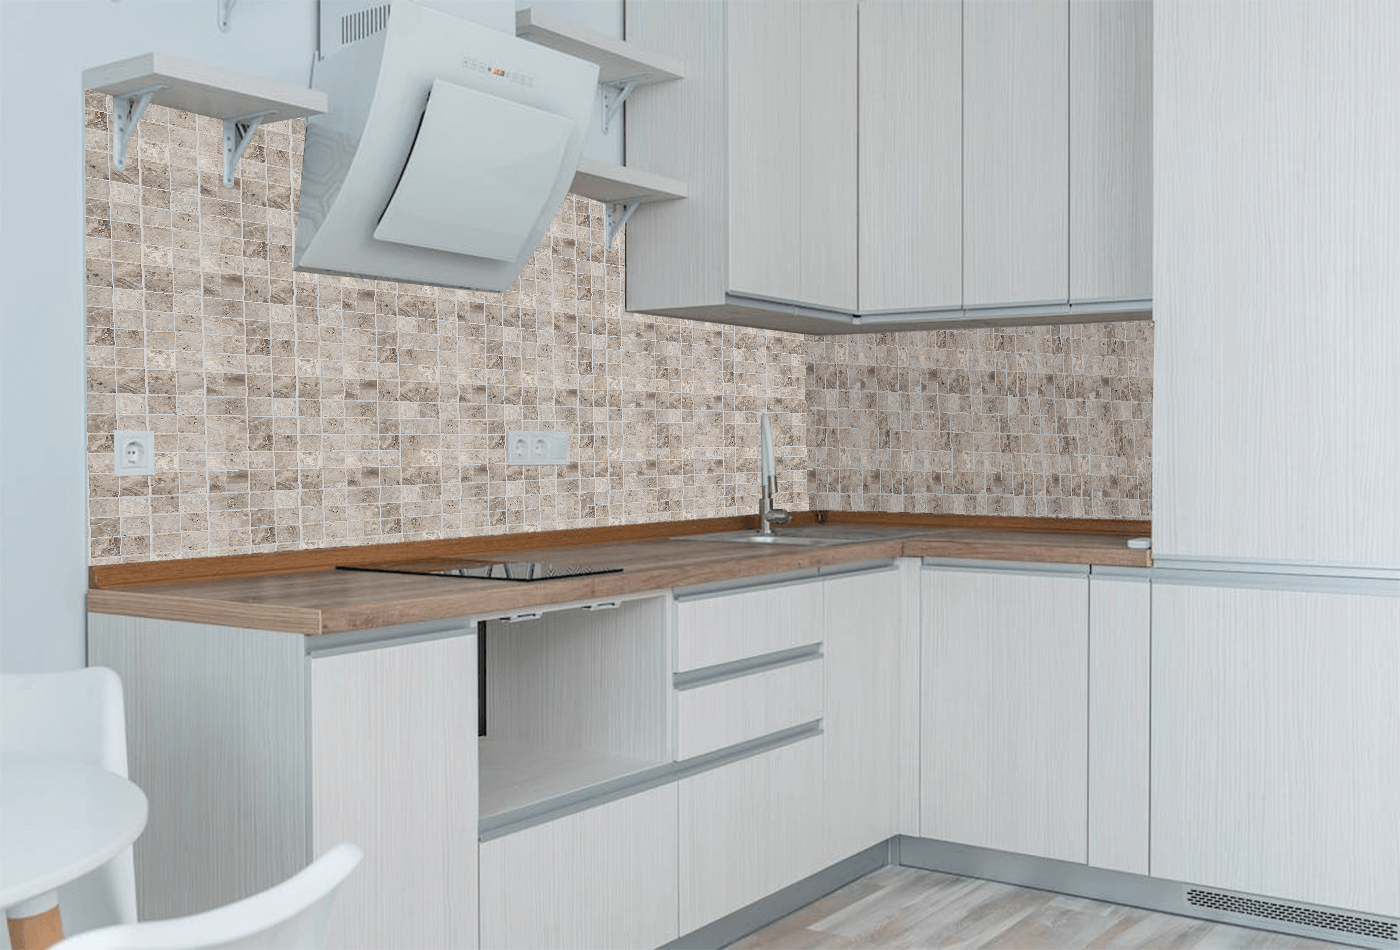 Silver Light Mosaic Tiles; A Distinctive Way to Style